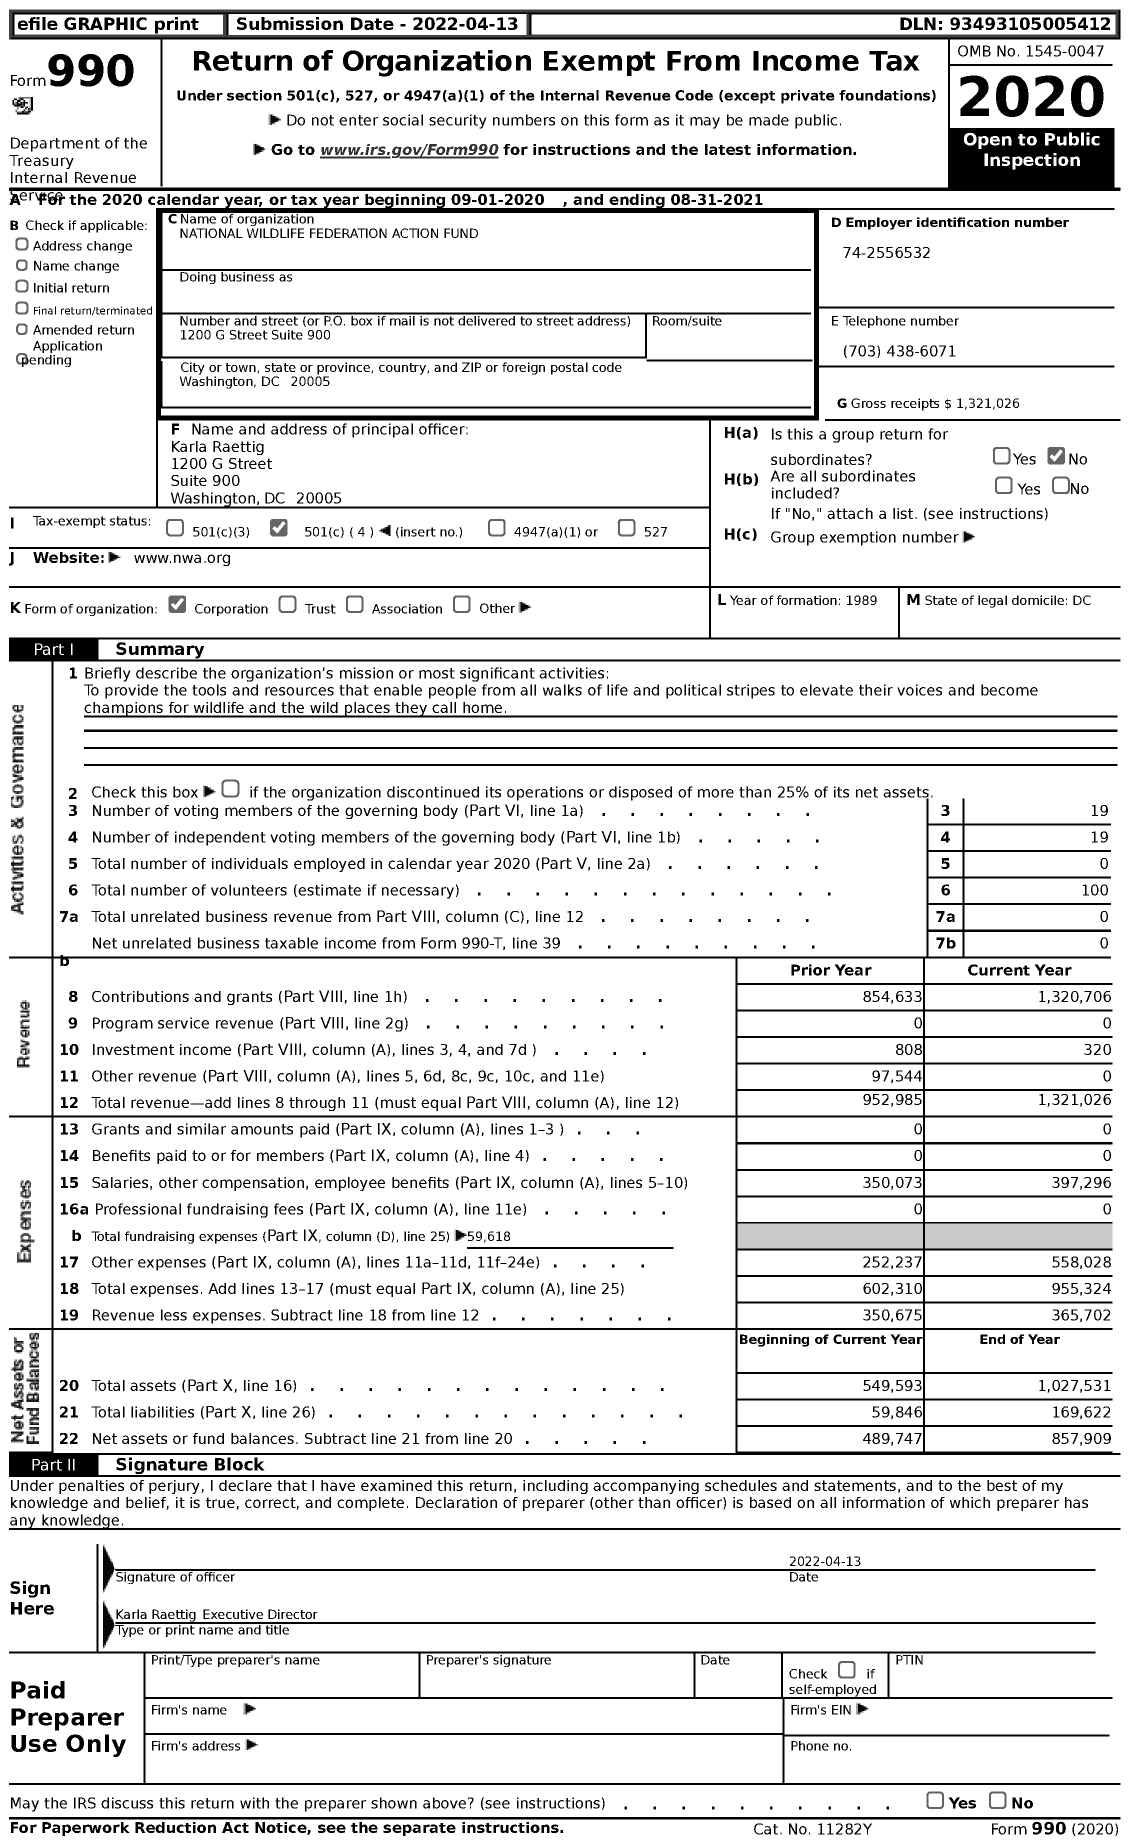 Image of first page of 2020 Form 990 for National Wildlife Federation Action Fund